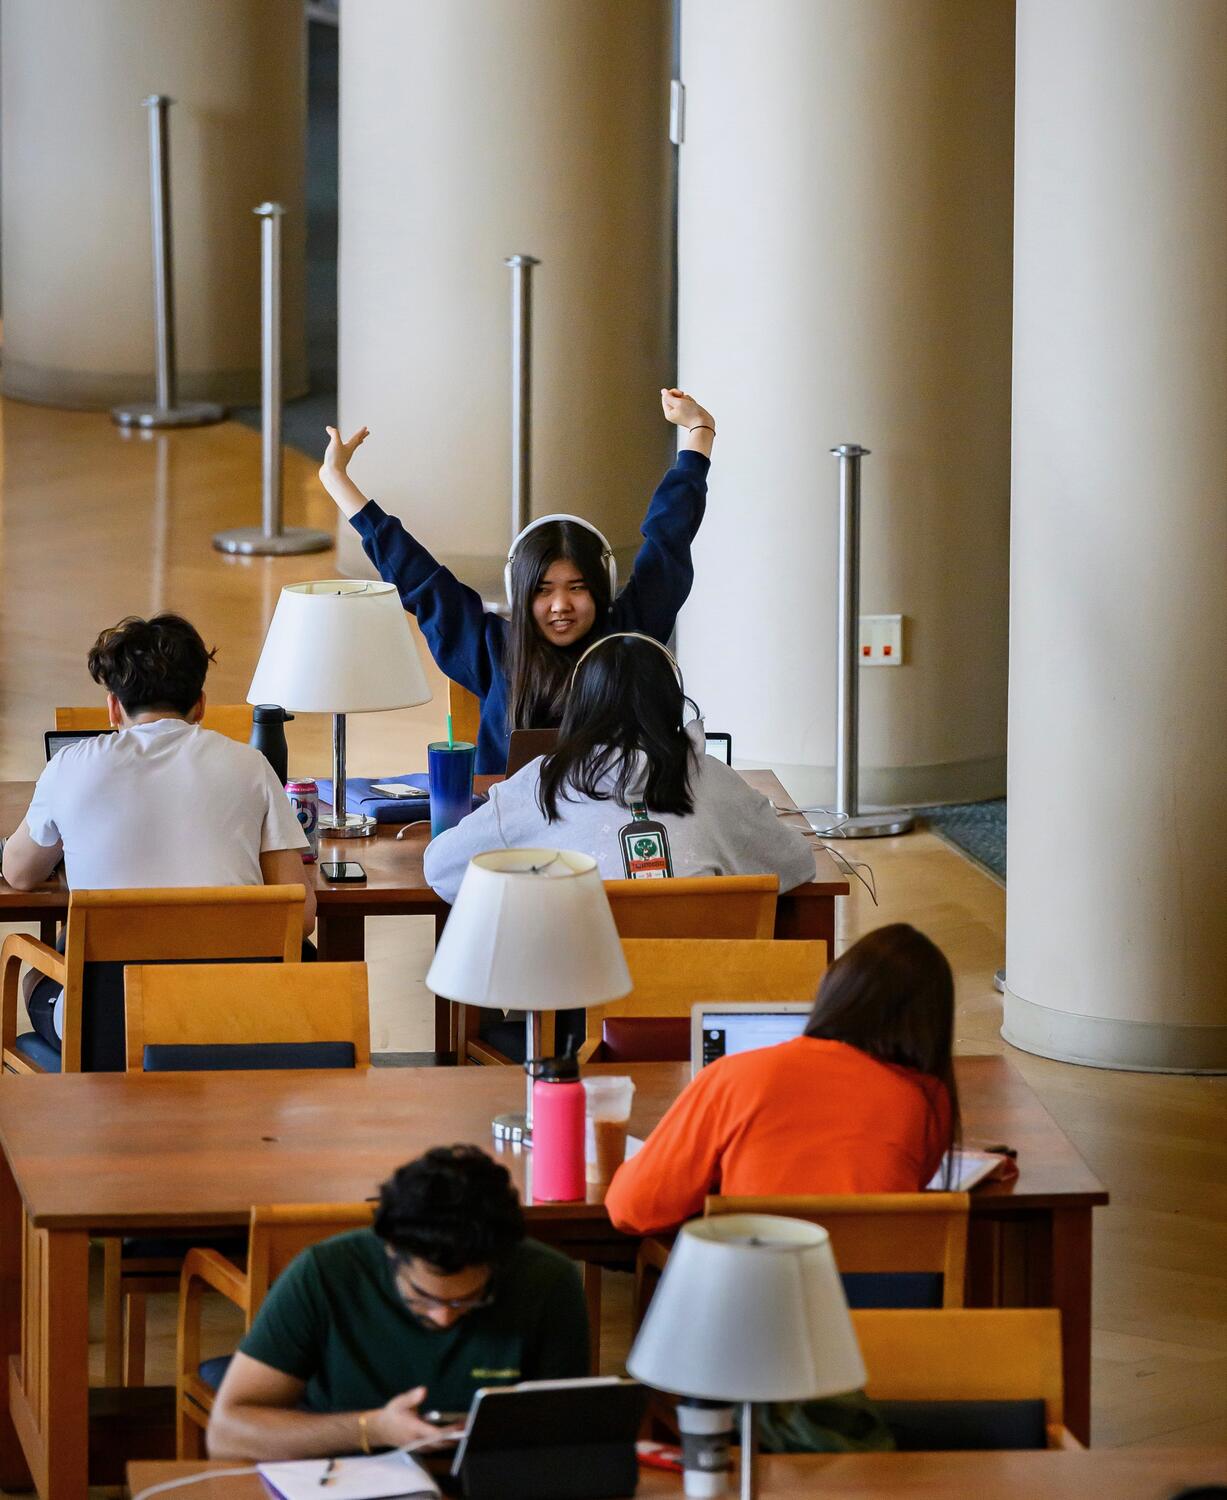 A group of students study in a common space, with one student yawning and stretching.